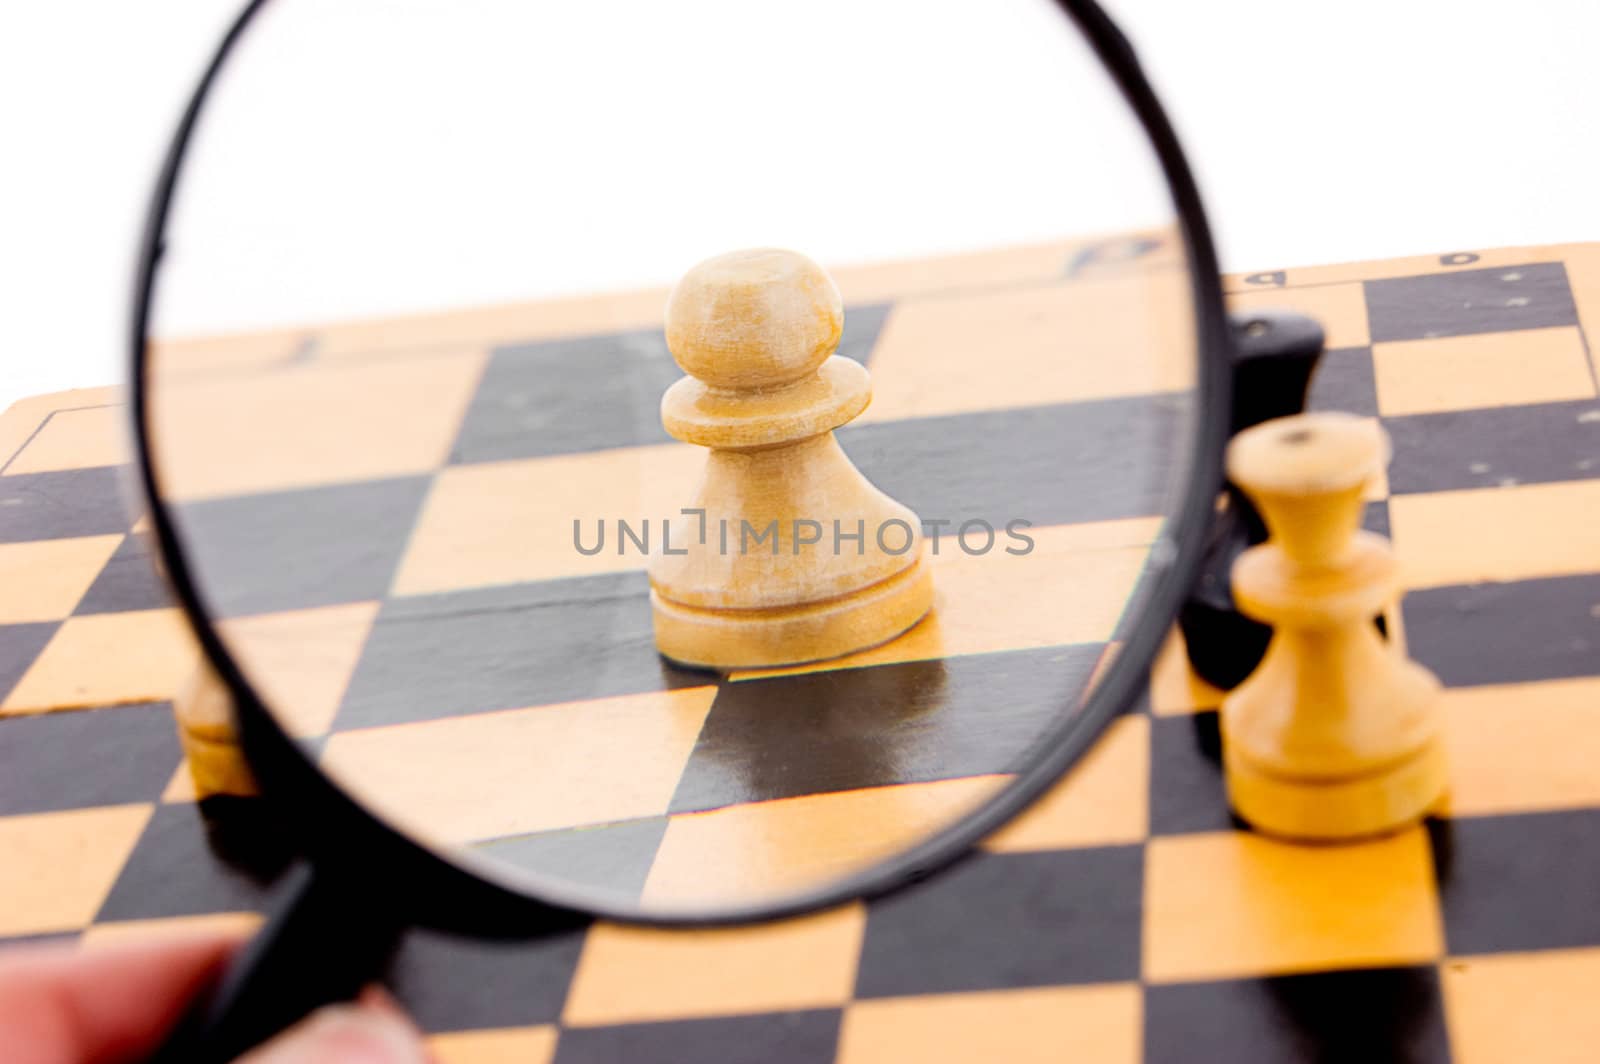 Pawn under magnifying glass by Angel_a